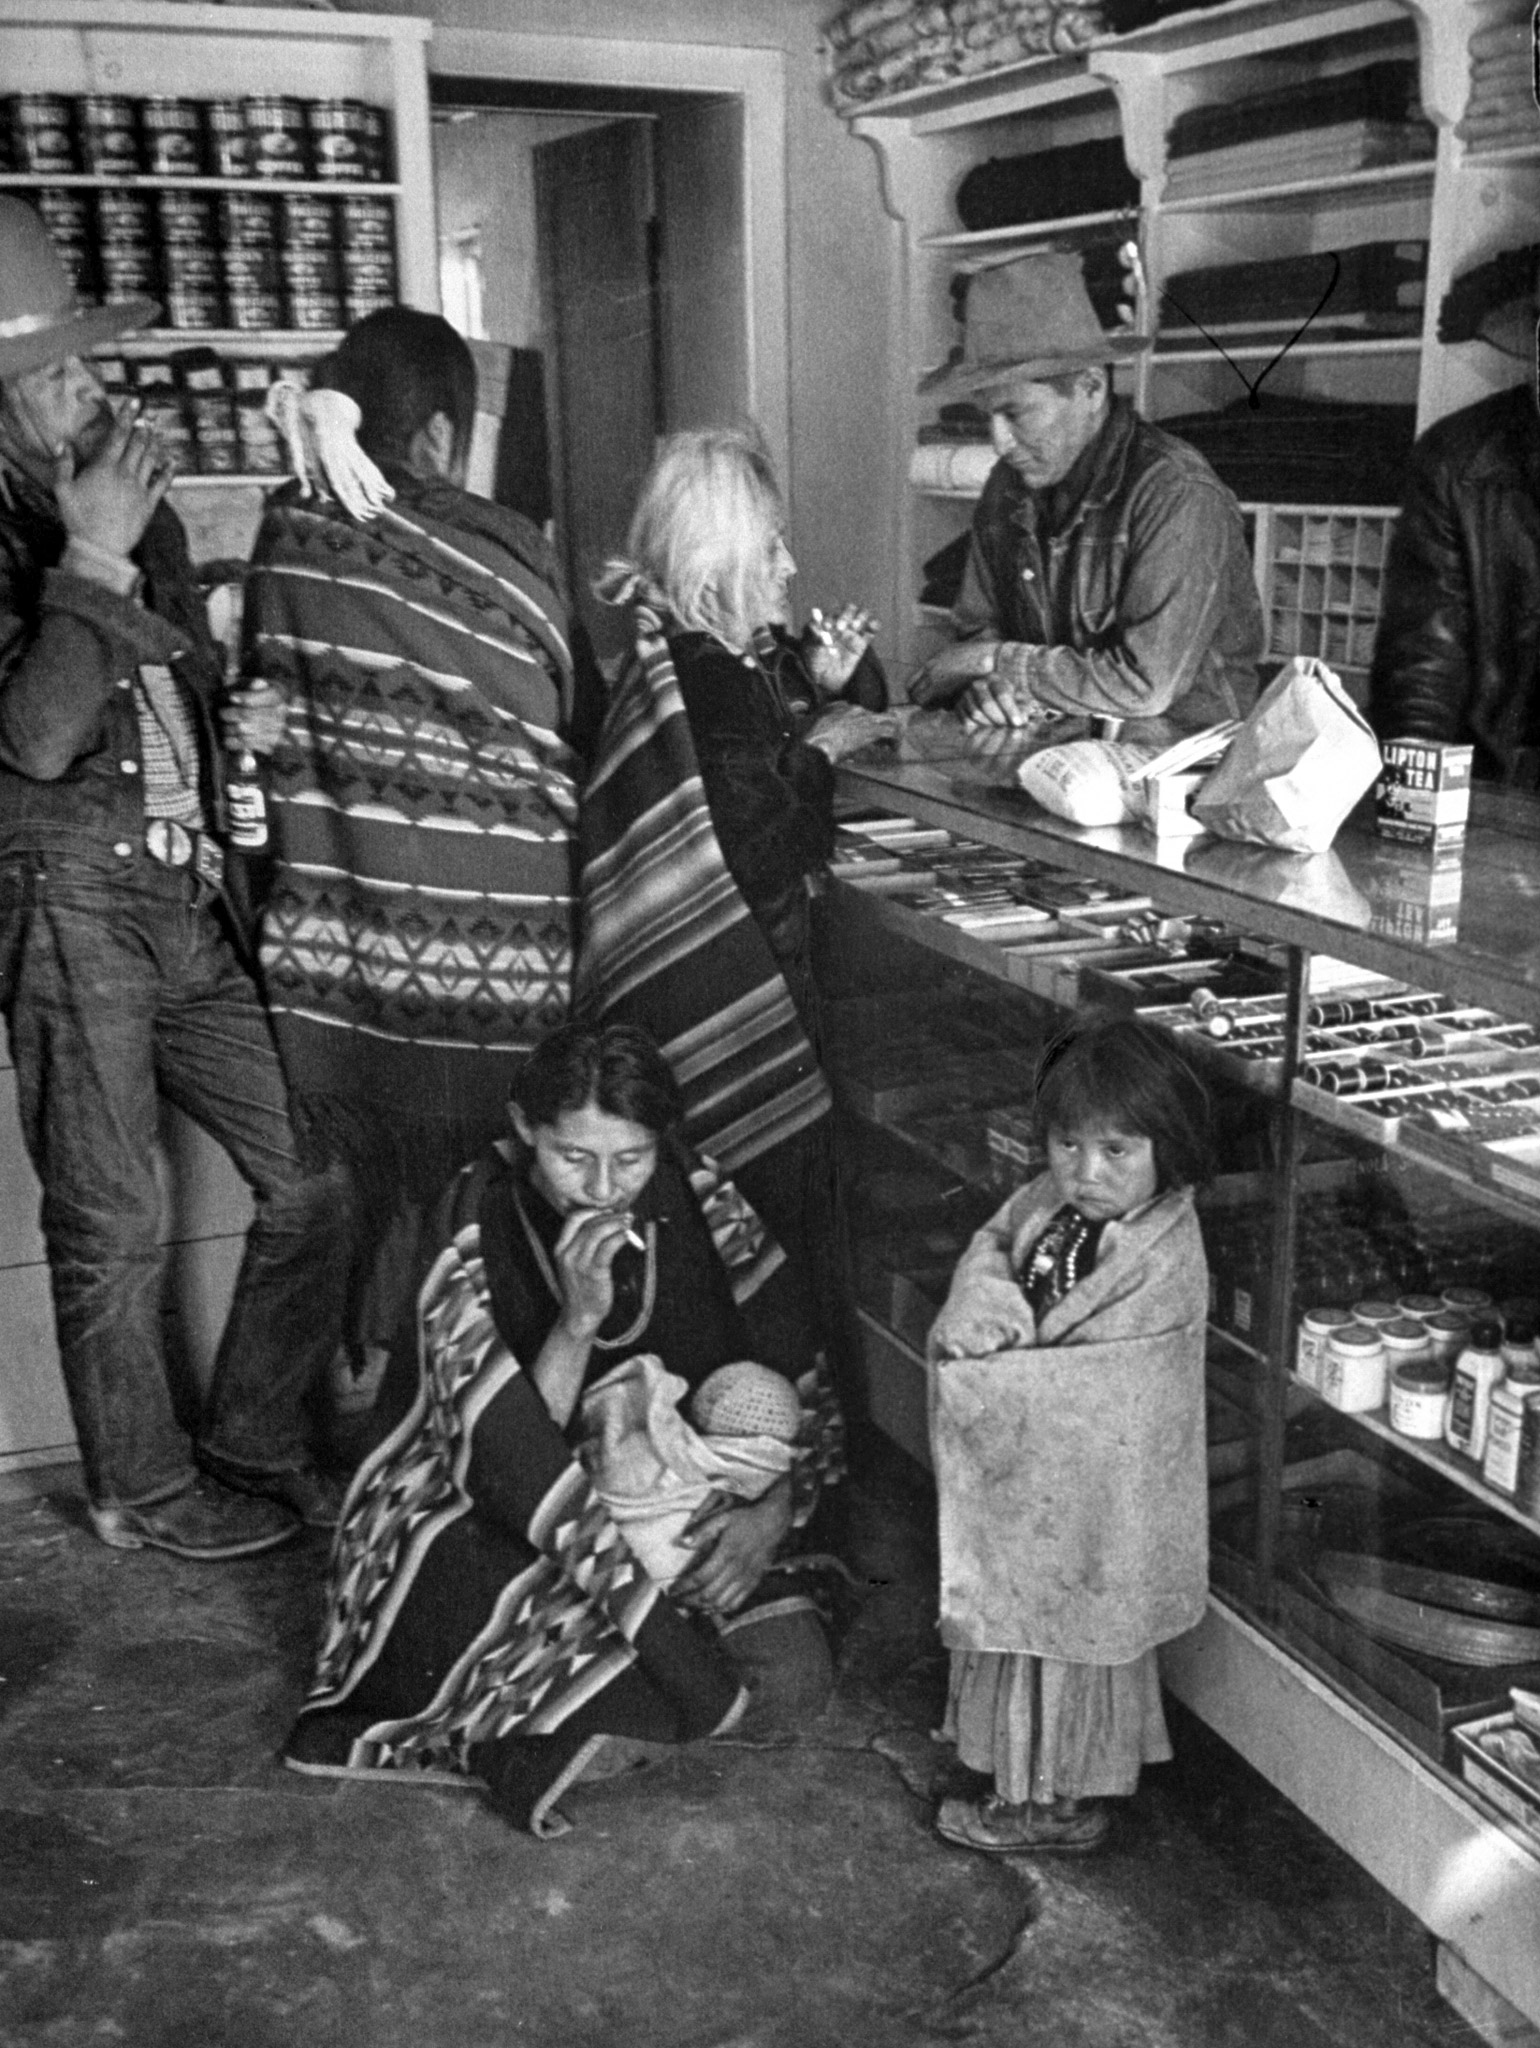 Navajos trading at the store on the reservation.